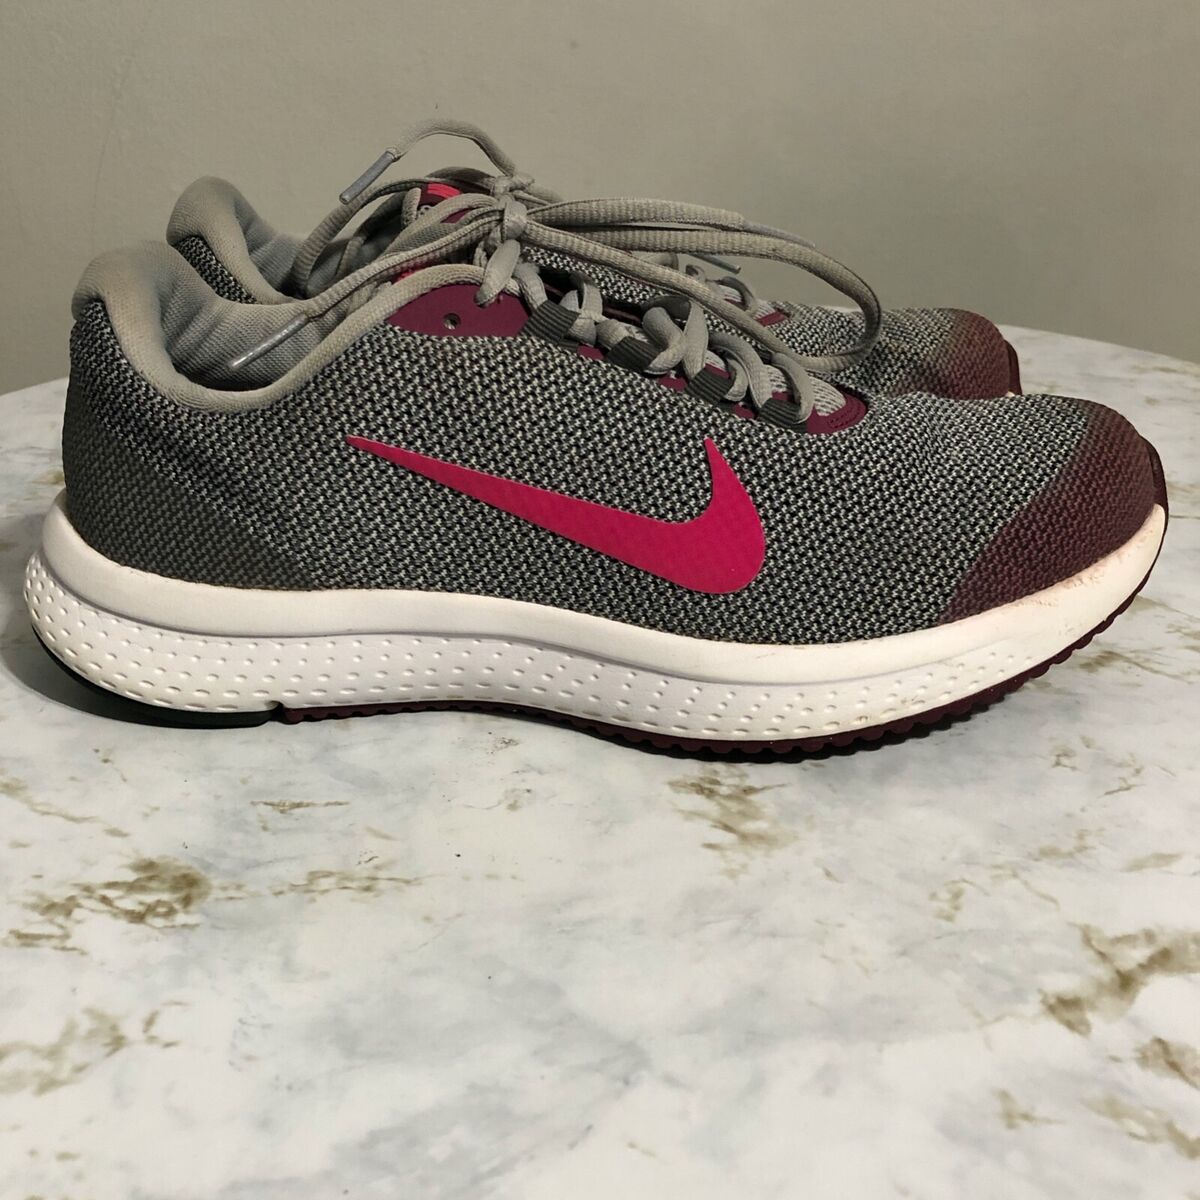 Nike RunAllDay Womens 8 Running Shoes Gray Pink Red Athletic Trainer eBay